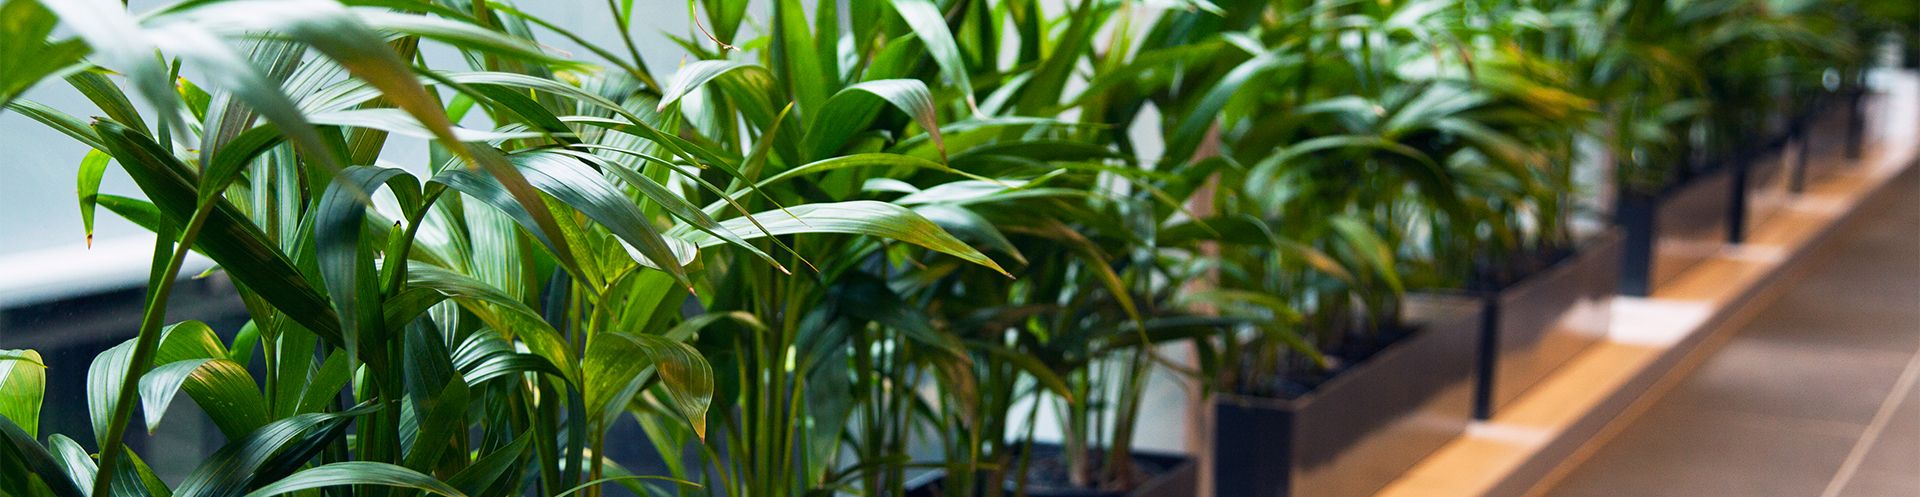 Indoor Plant Hire FAQs | Questions and Answers | The Plant Man